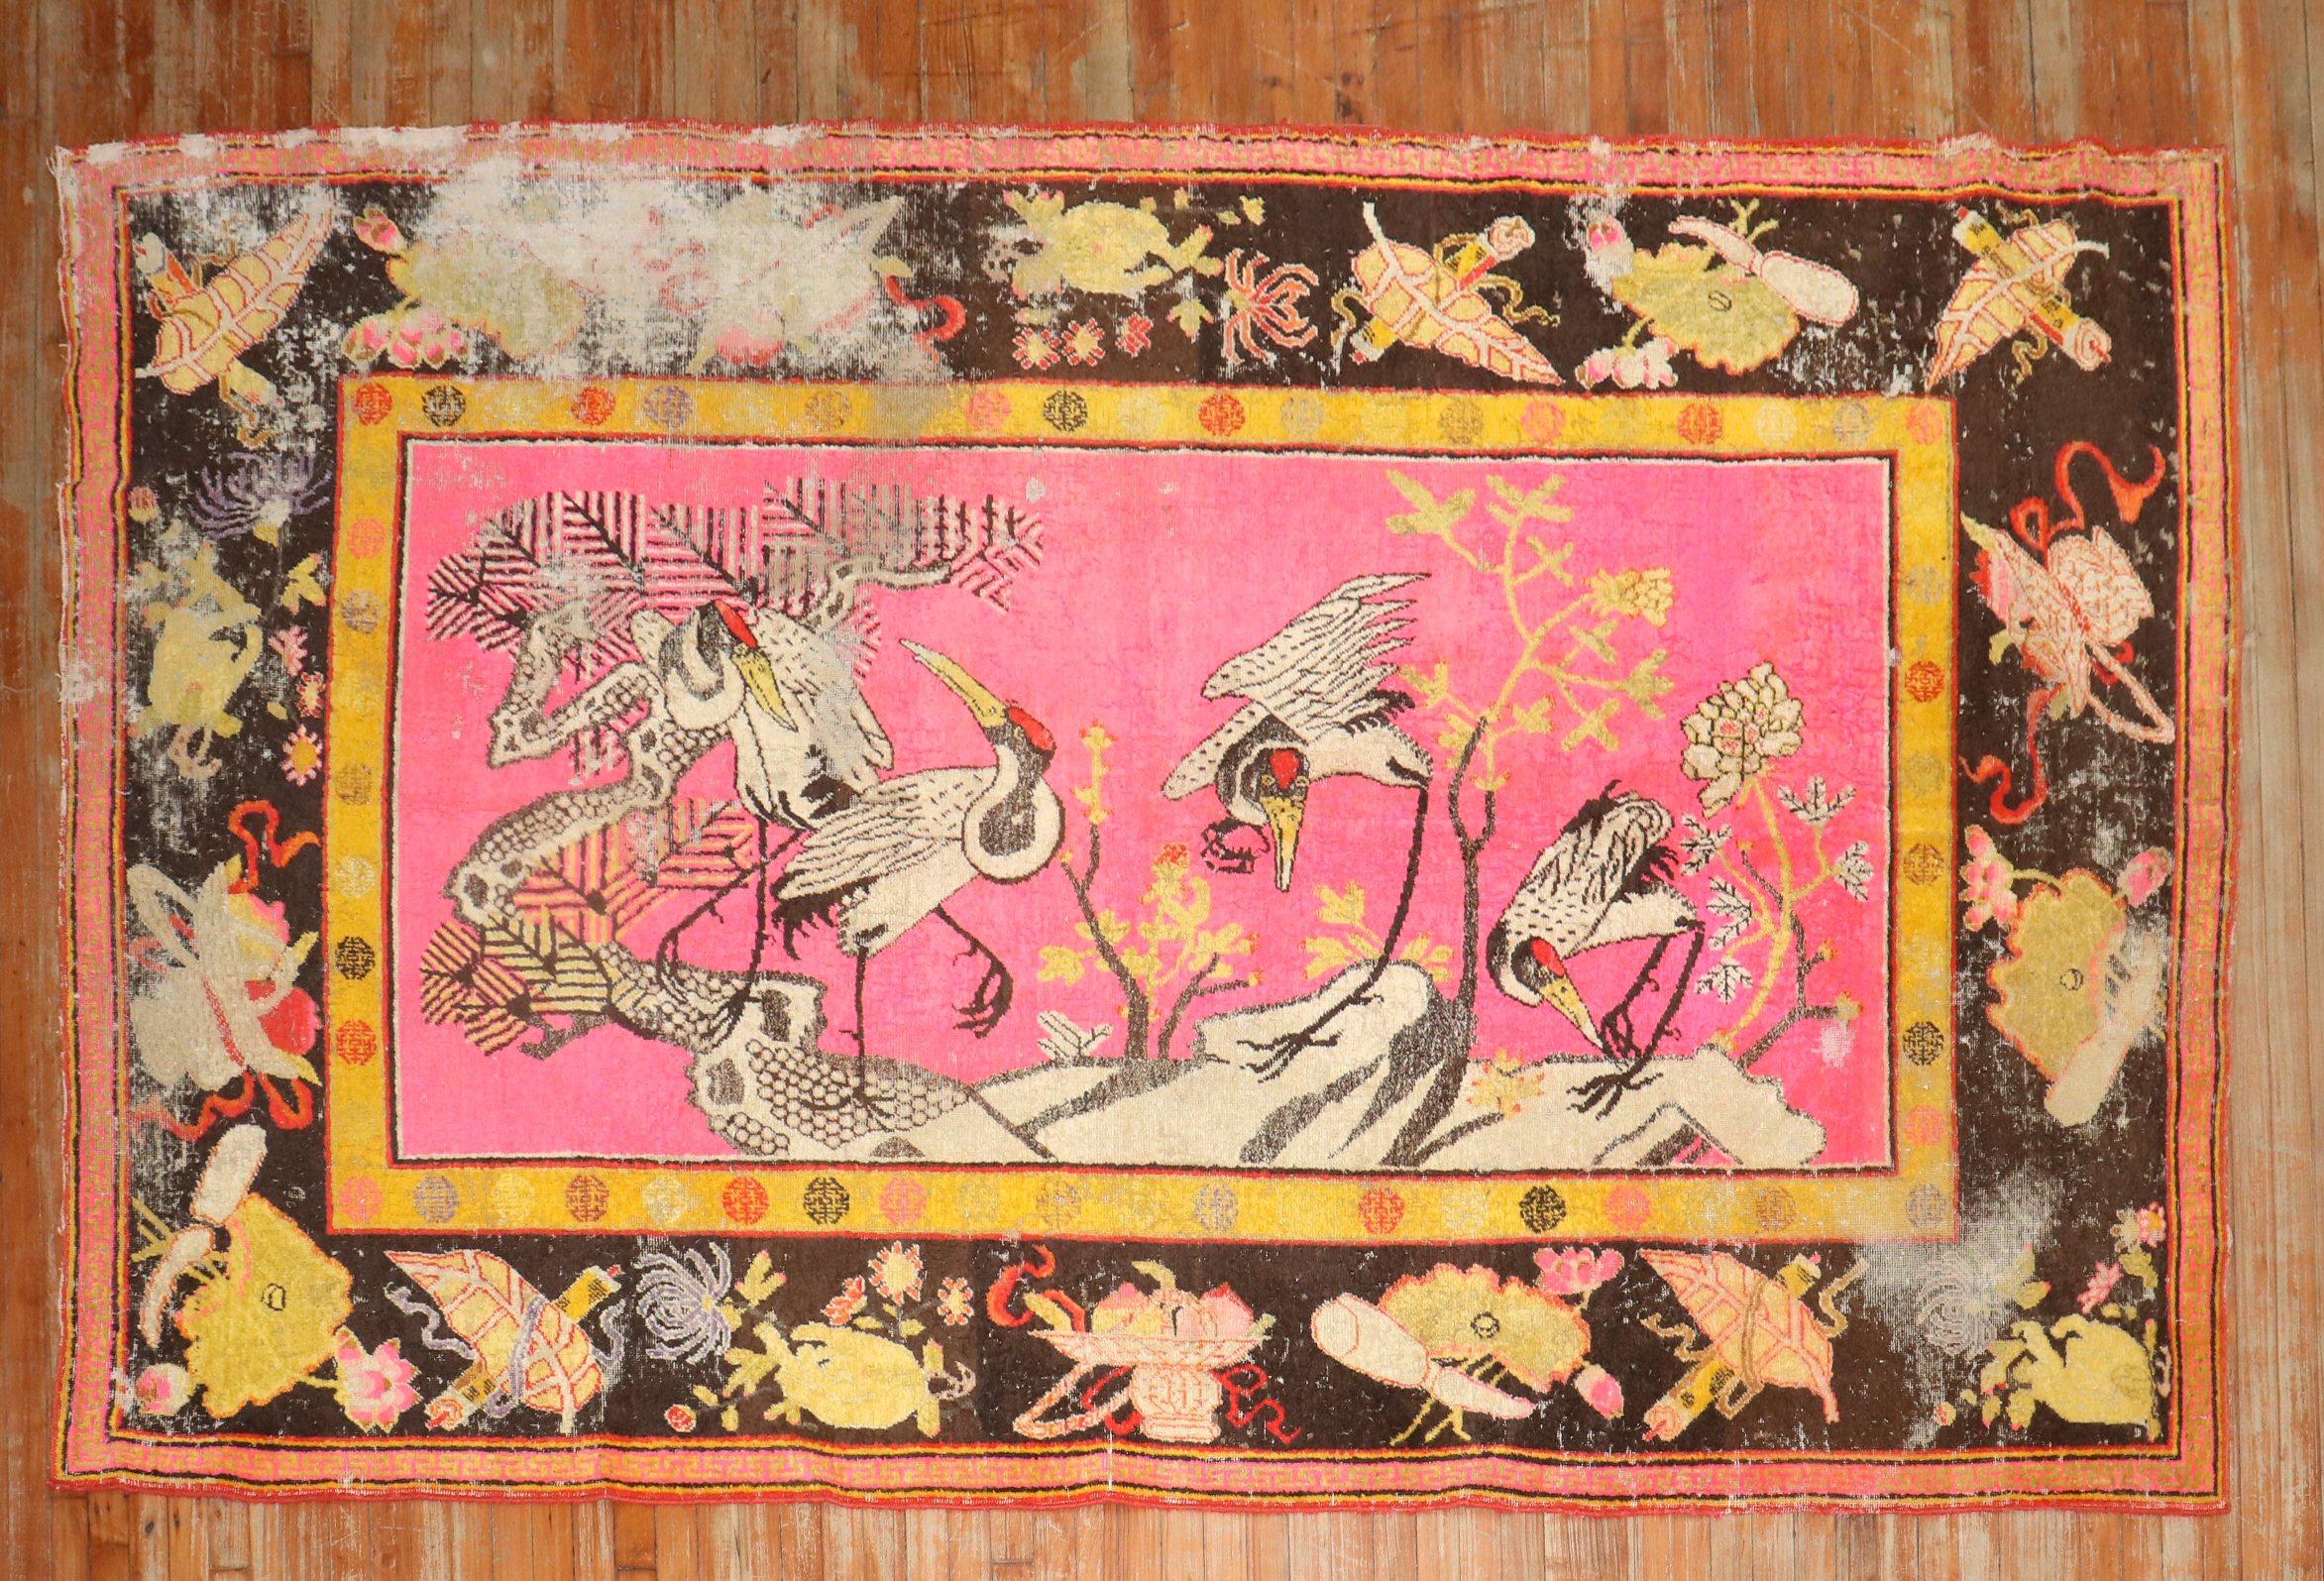 Late 19th Century distressed antique samarkand khotan rug with 4 flamingos hovering over a bright pink ground

5'10'' x 10'.

